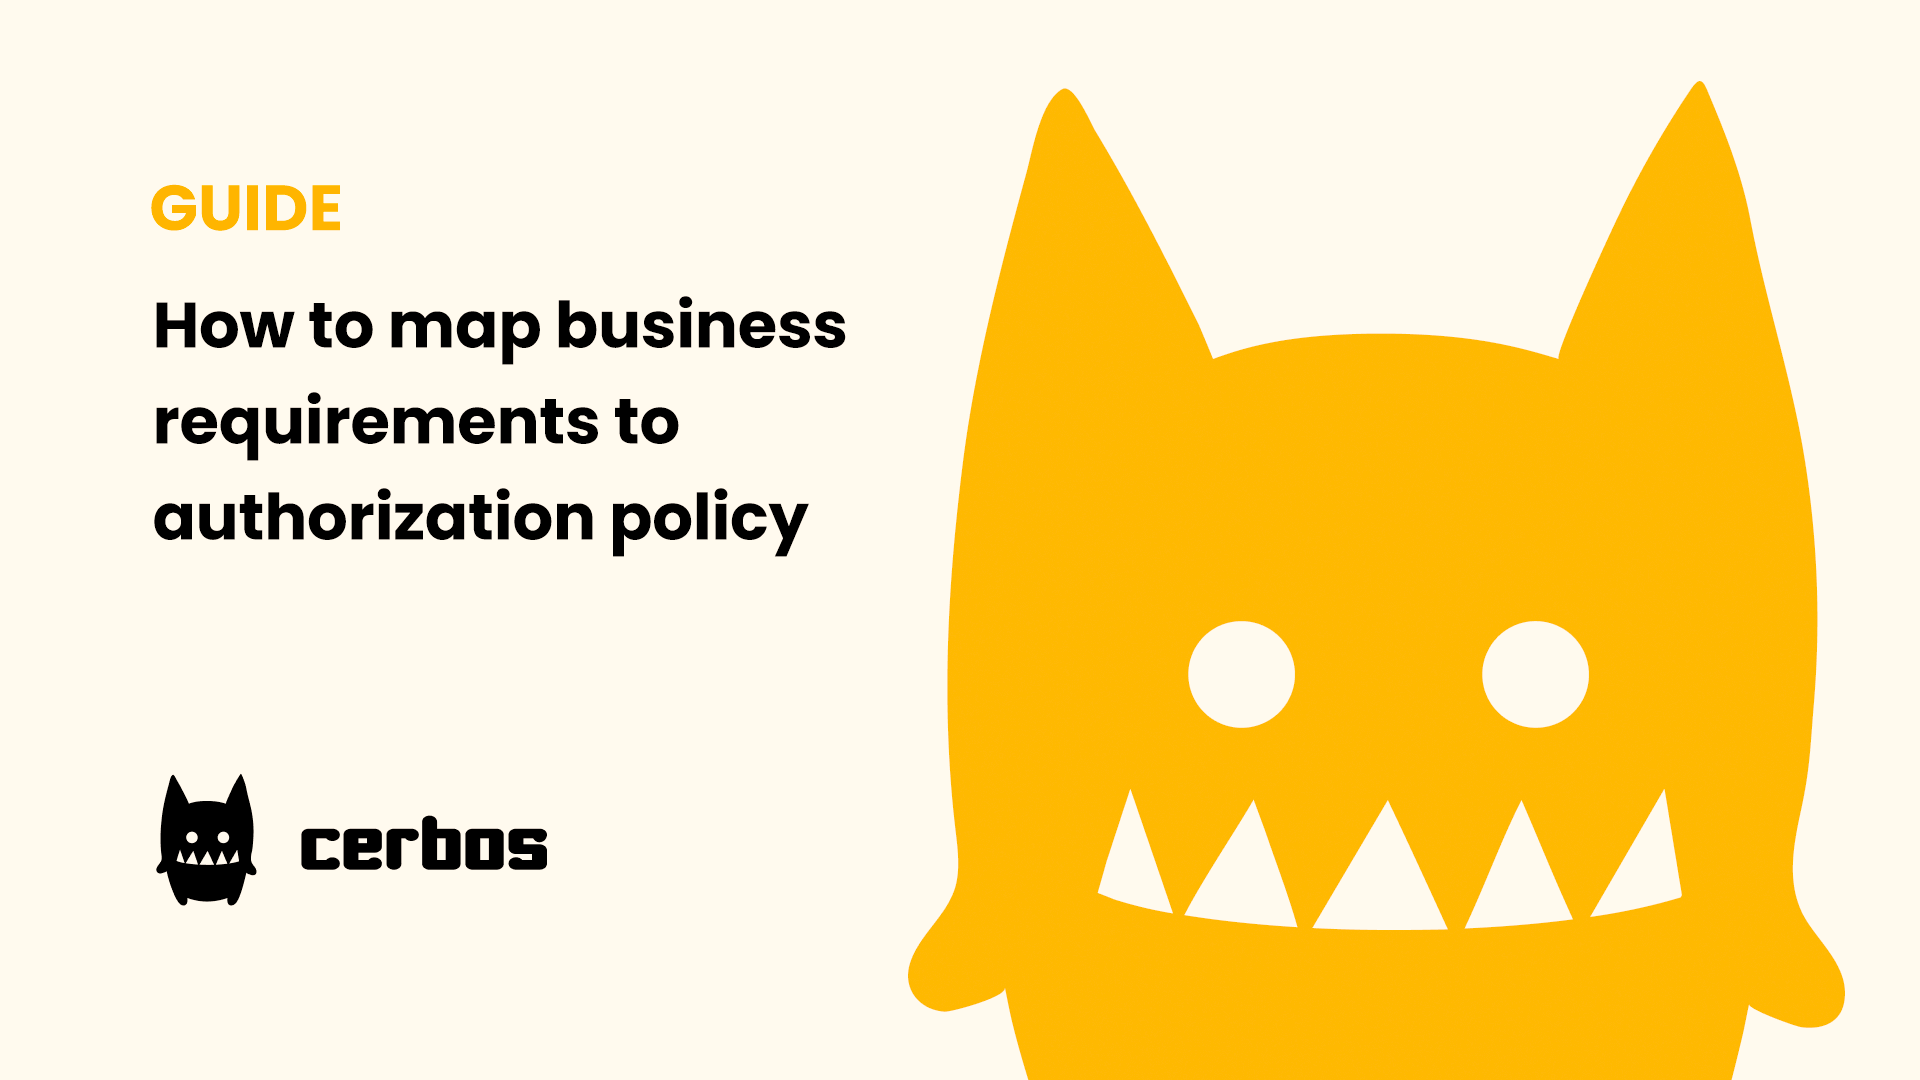 Mapping business requirements to authorization policy